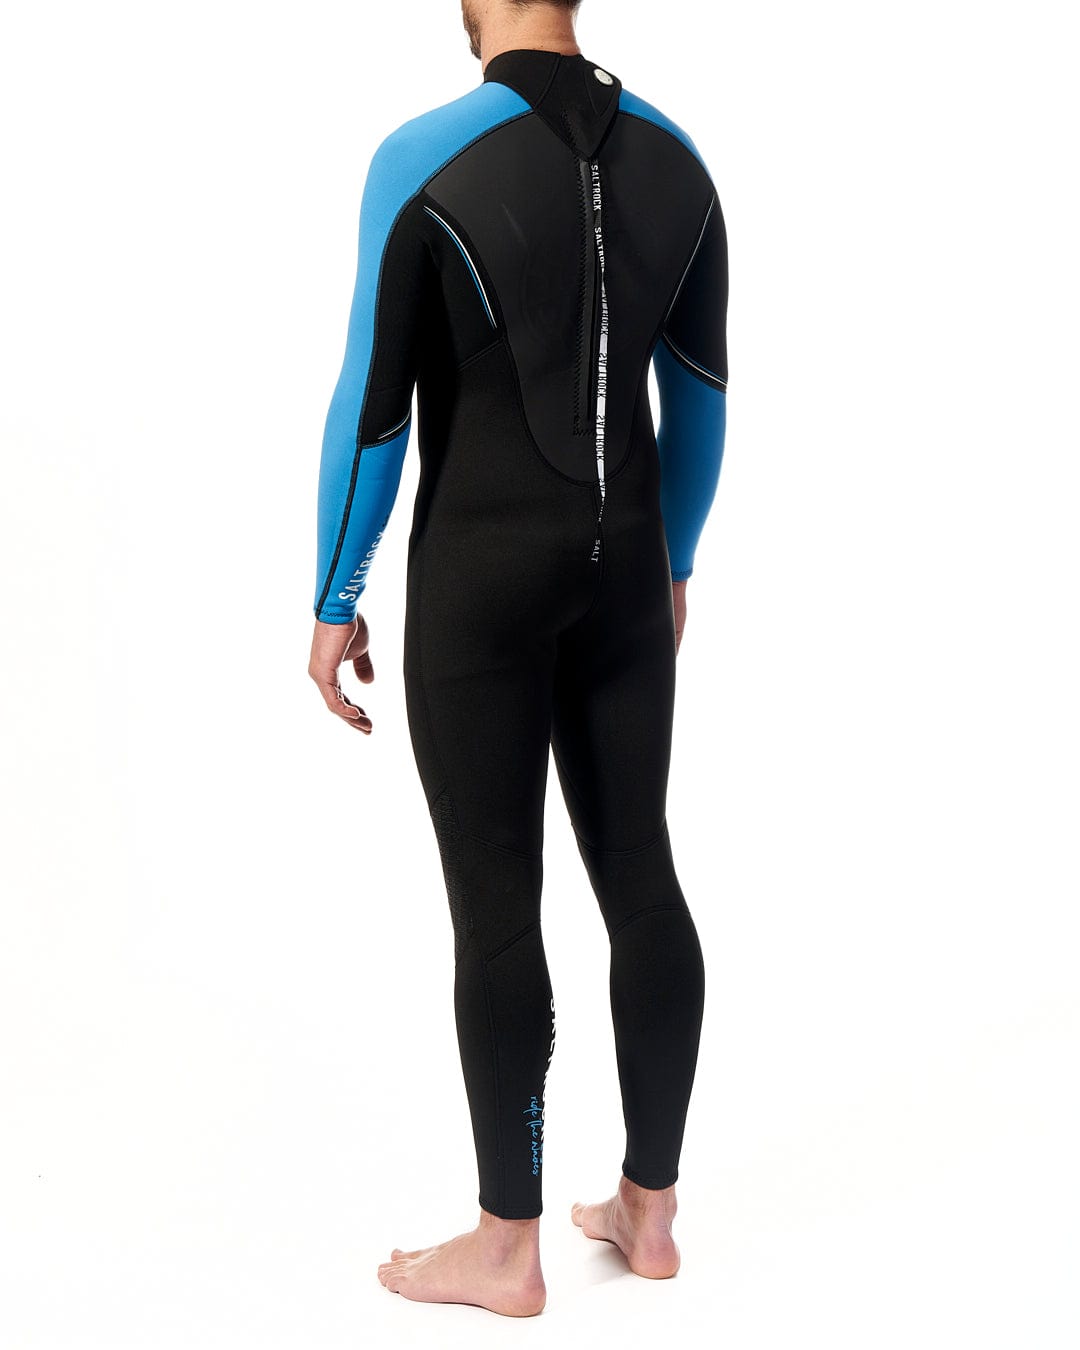 The back view of a man in a Saltrock Core - Mens 3/2 Full Wetsuit - Blue/Black.